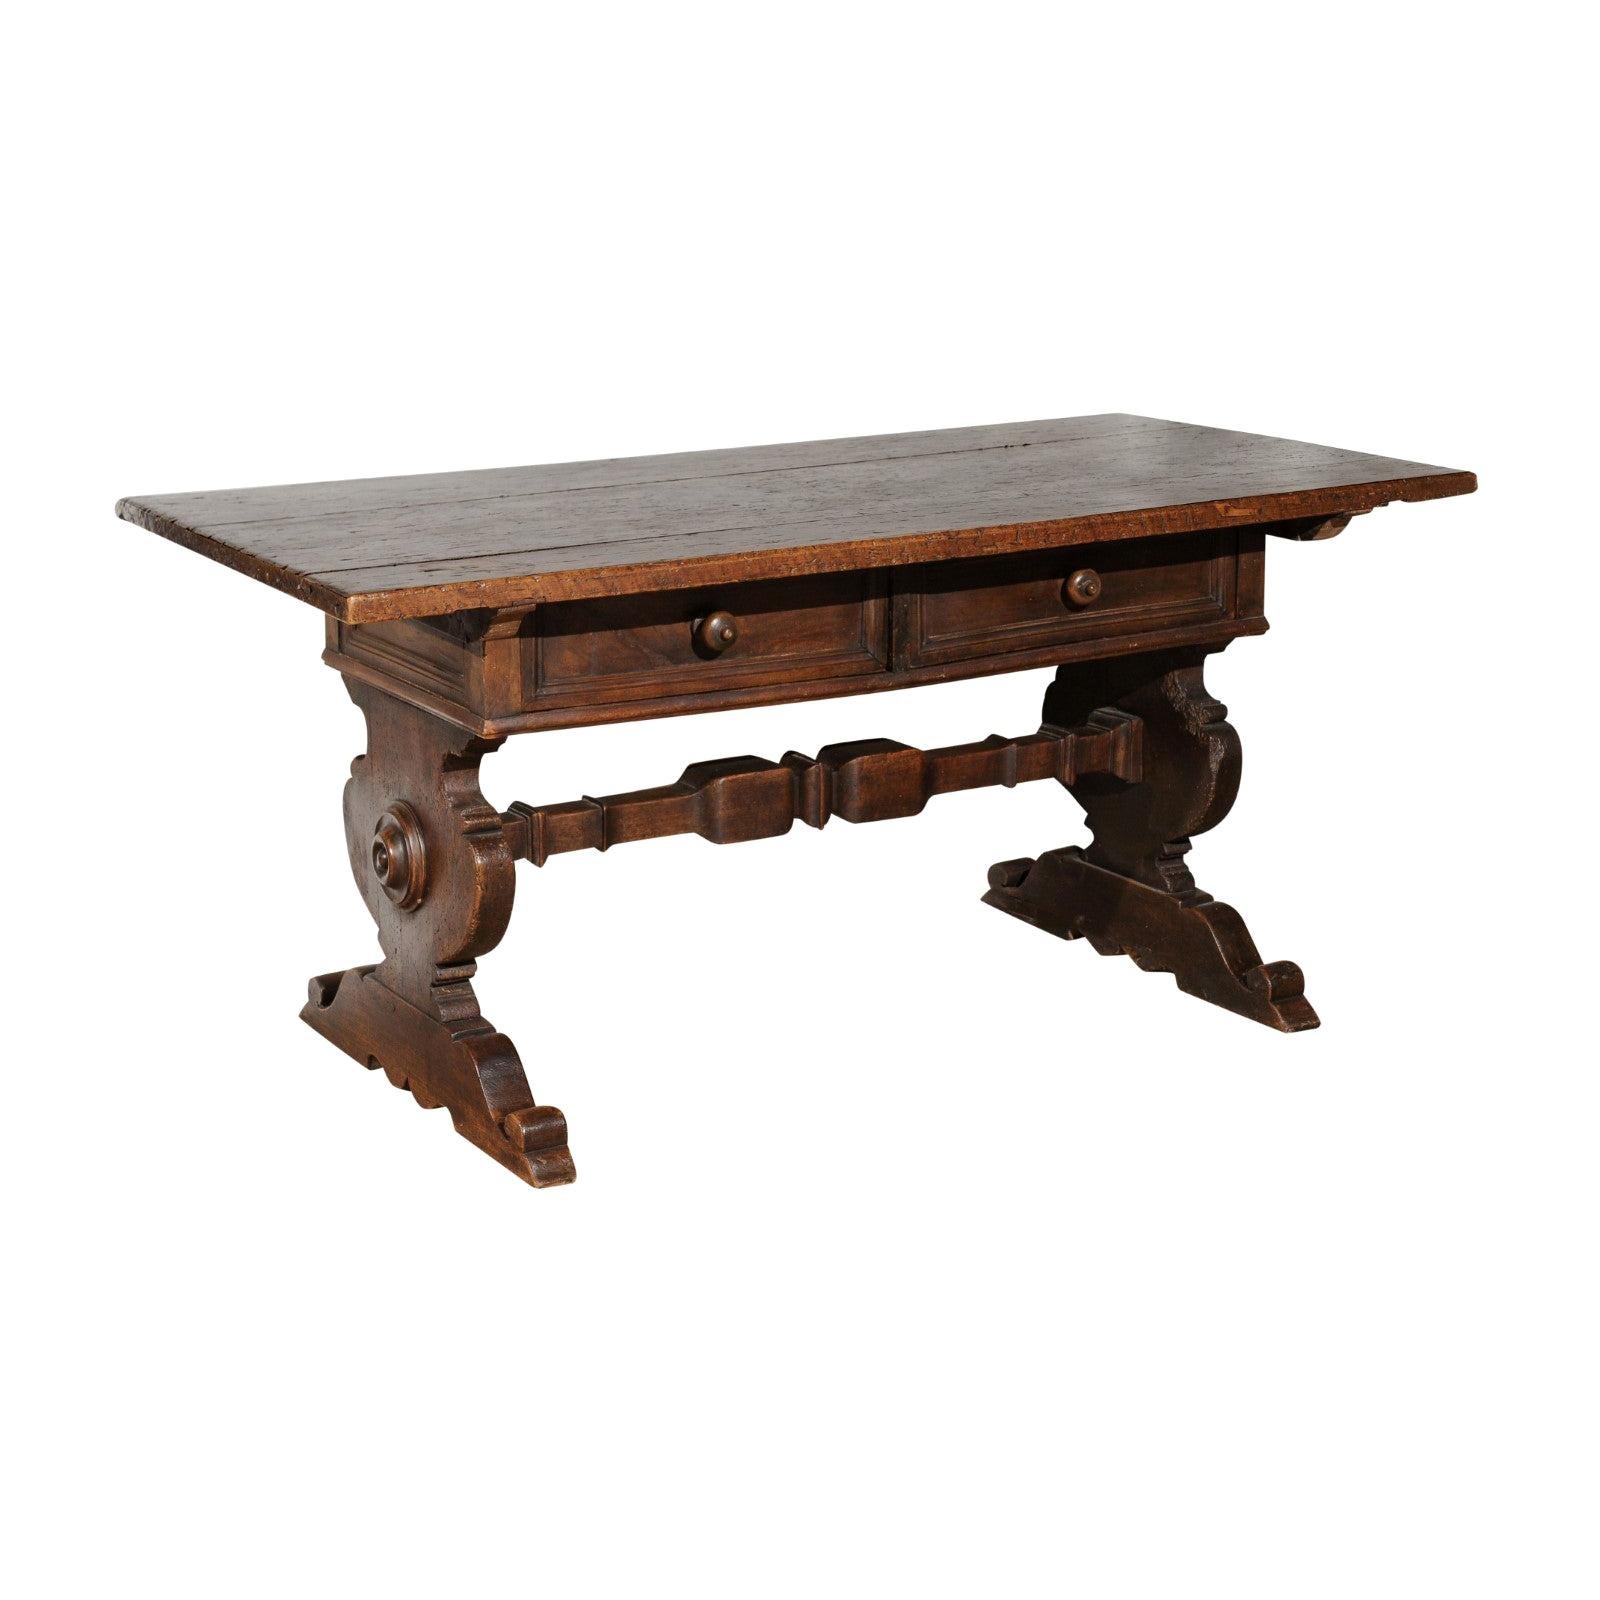 Italian Alpine Baroque Style 19th Century Walnut Table with Trestle Base For Sale